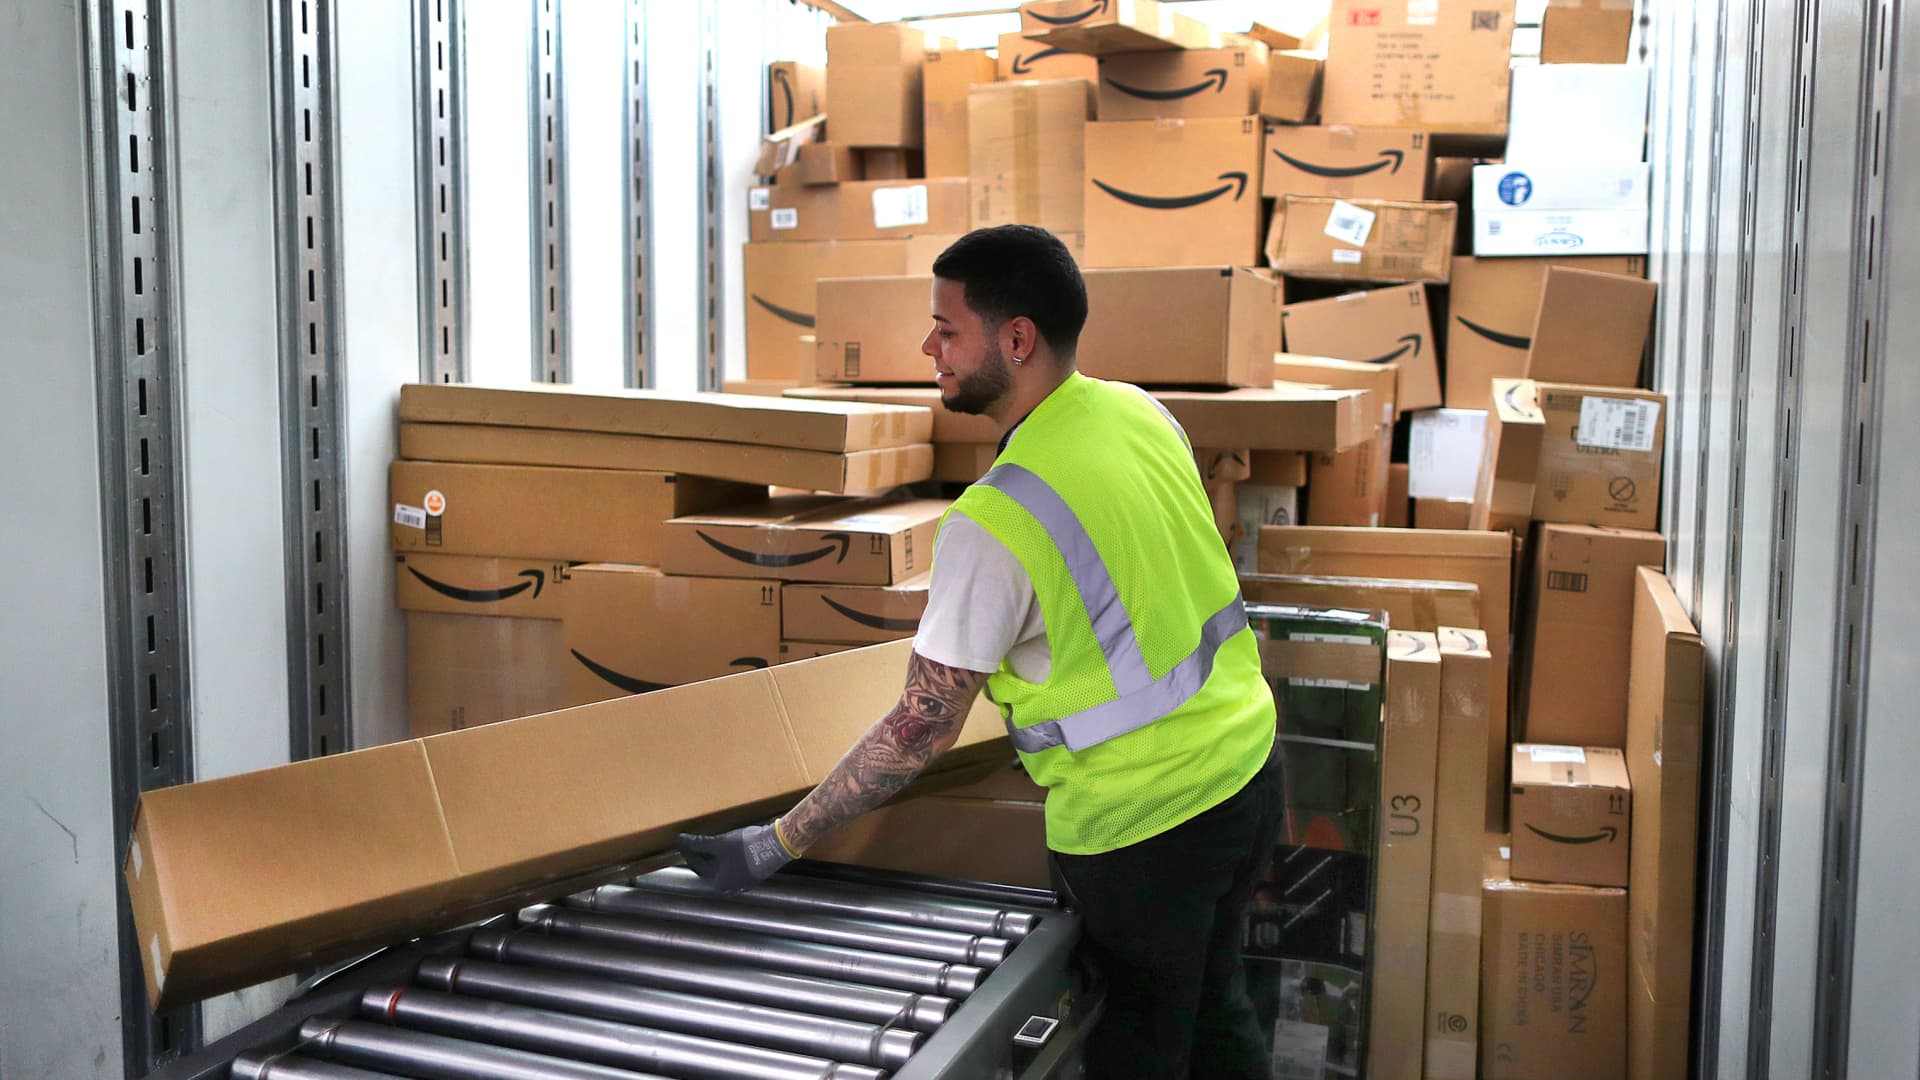 Amazon moves closer to facing its first unionization vote in six years